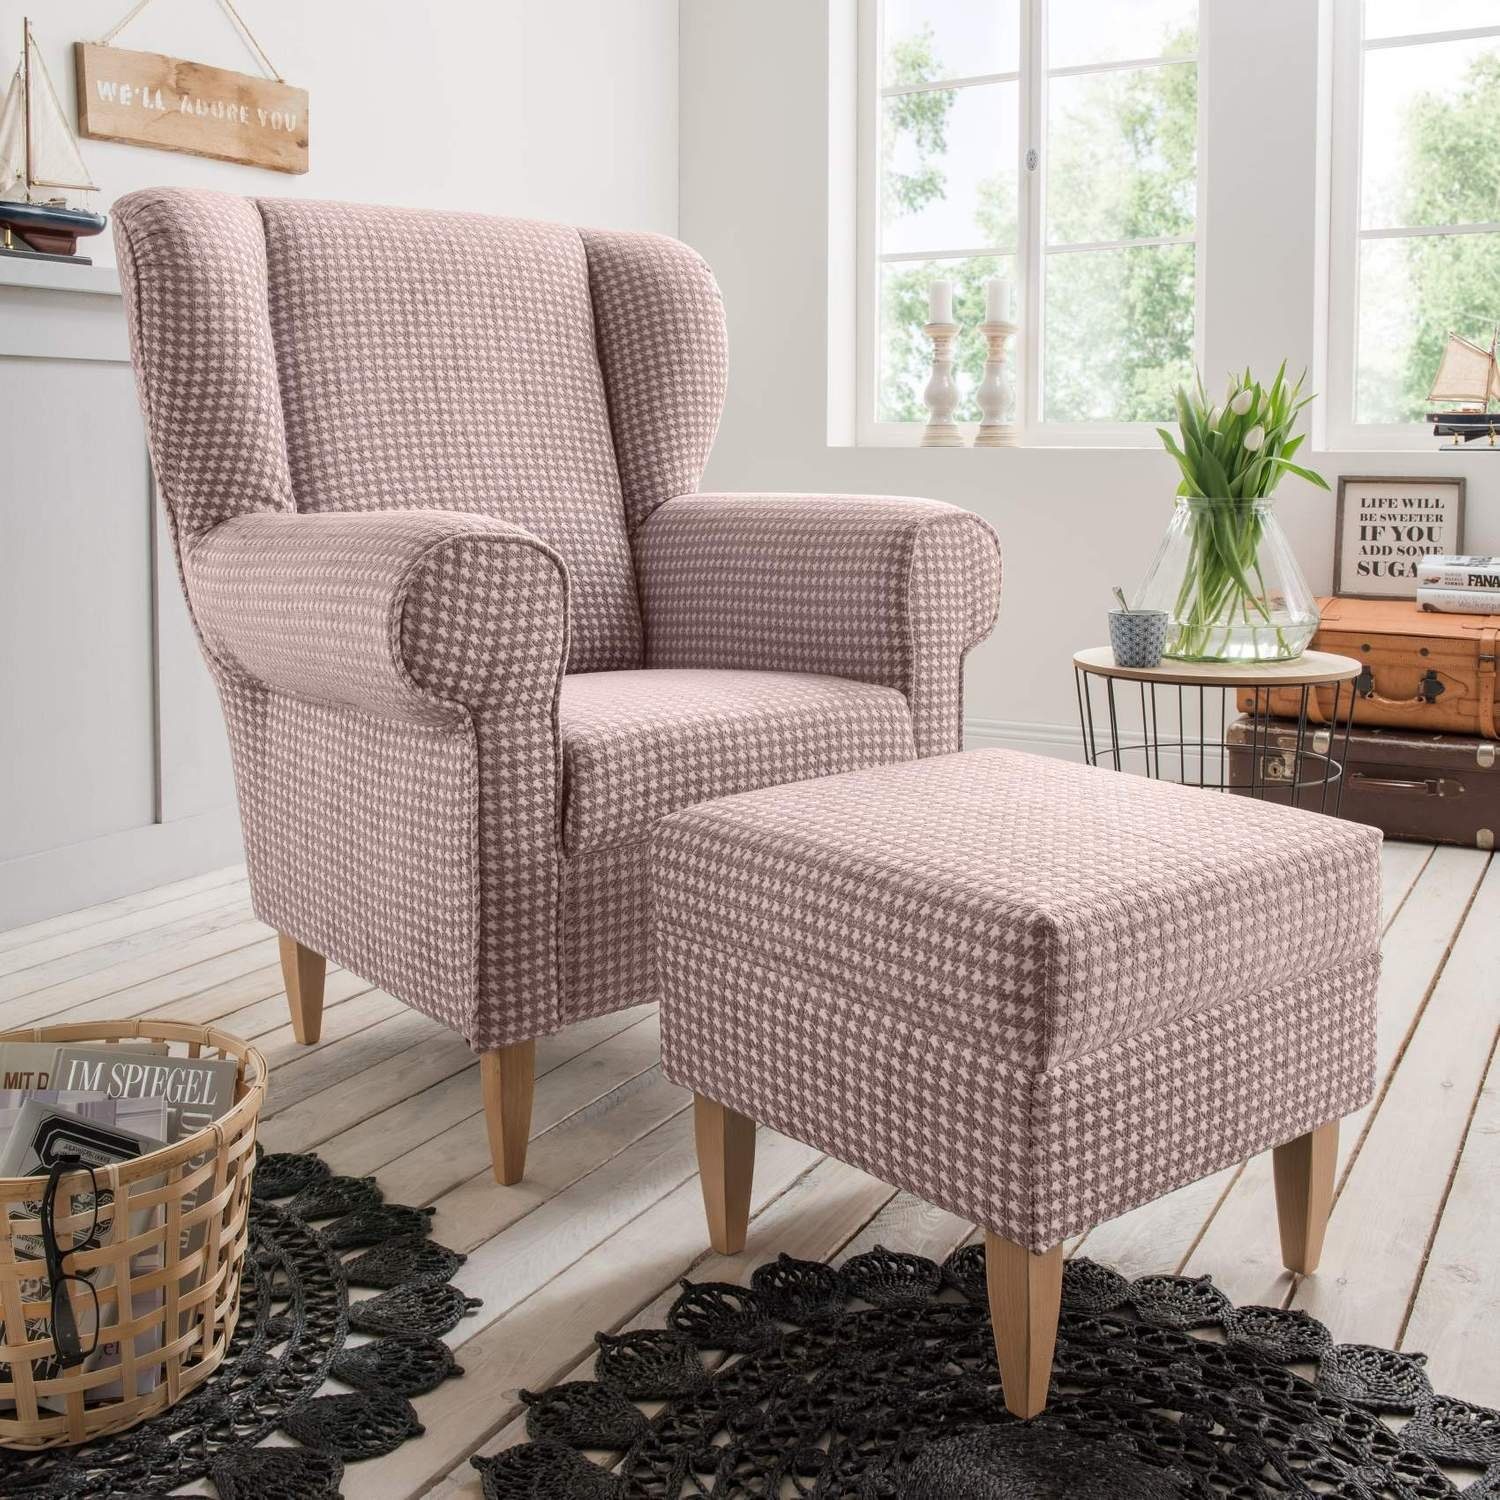 BENFORMATO HOME COLLECTION Loungesessel Polstersessel Stoff Ohrensessel AVERSA Flamingo Talento